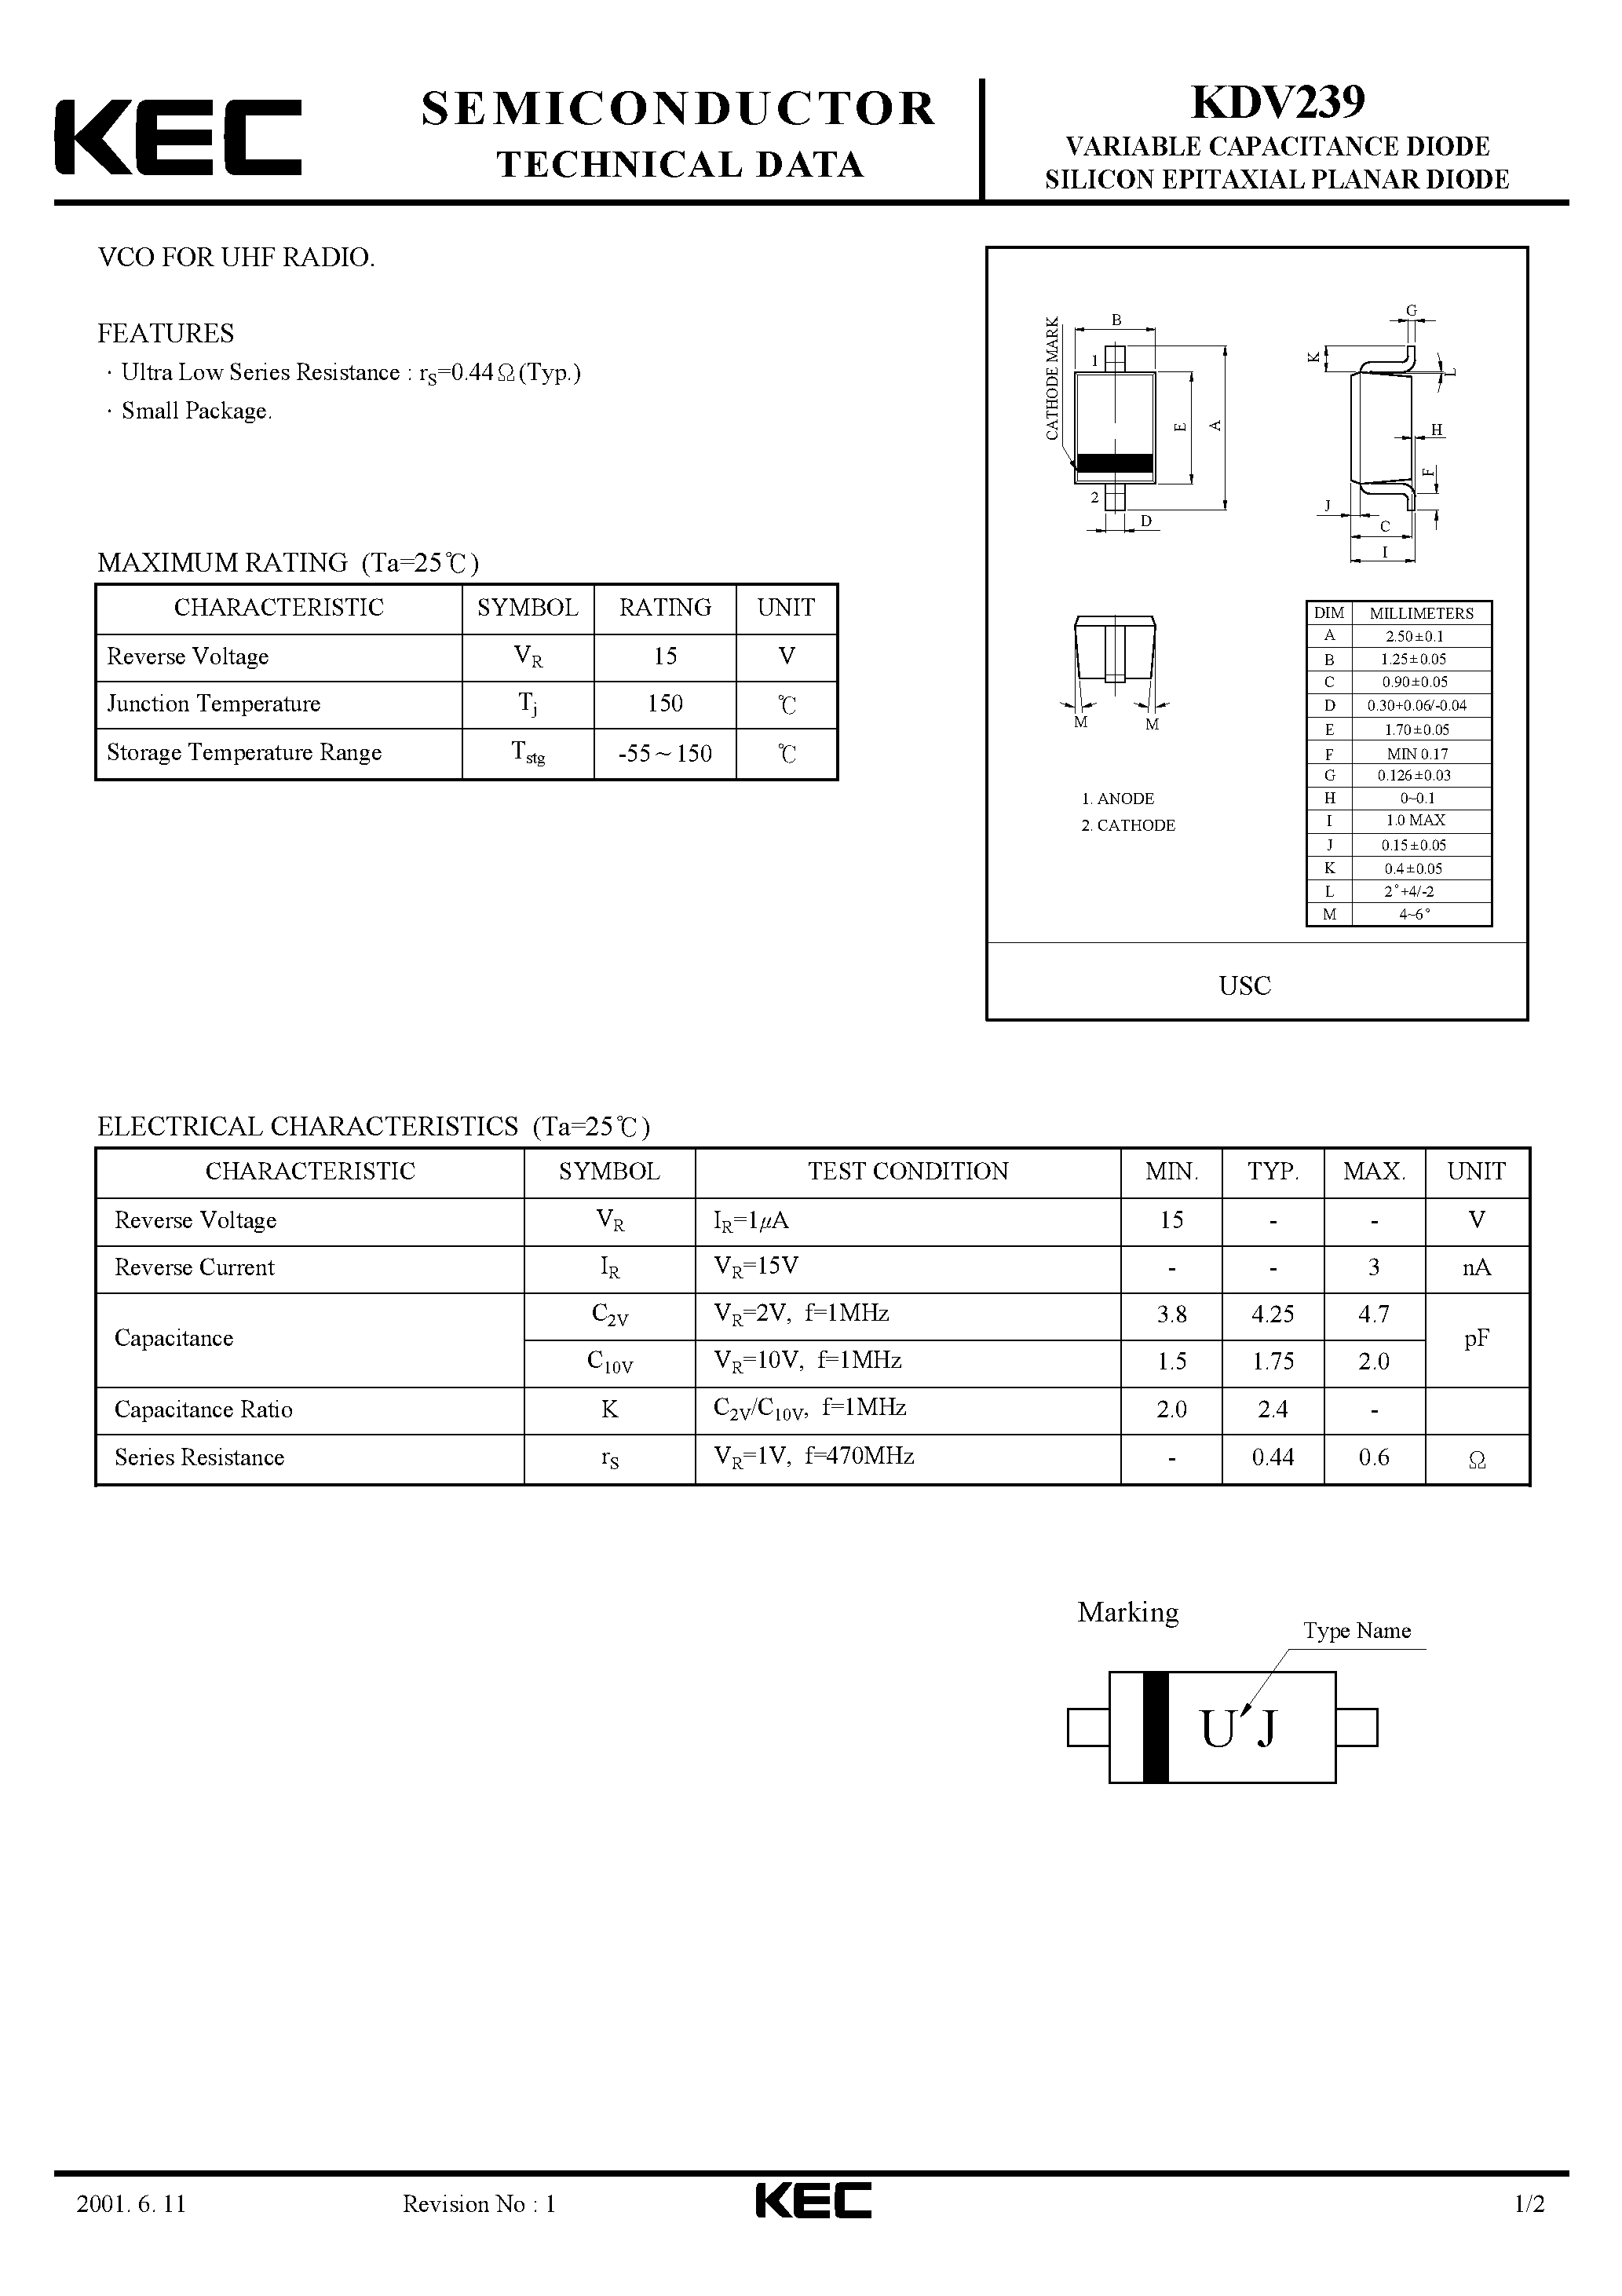 Datasheet KDV239 - VARIABLE CAPACITANCE DIODE SILICON EPITAXIAL PLANAR DIODE(VCO FOR UHF RADIO) page 1